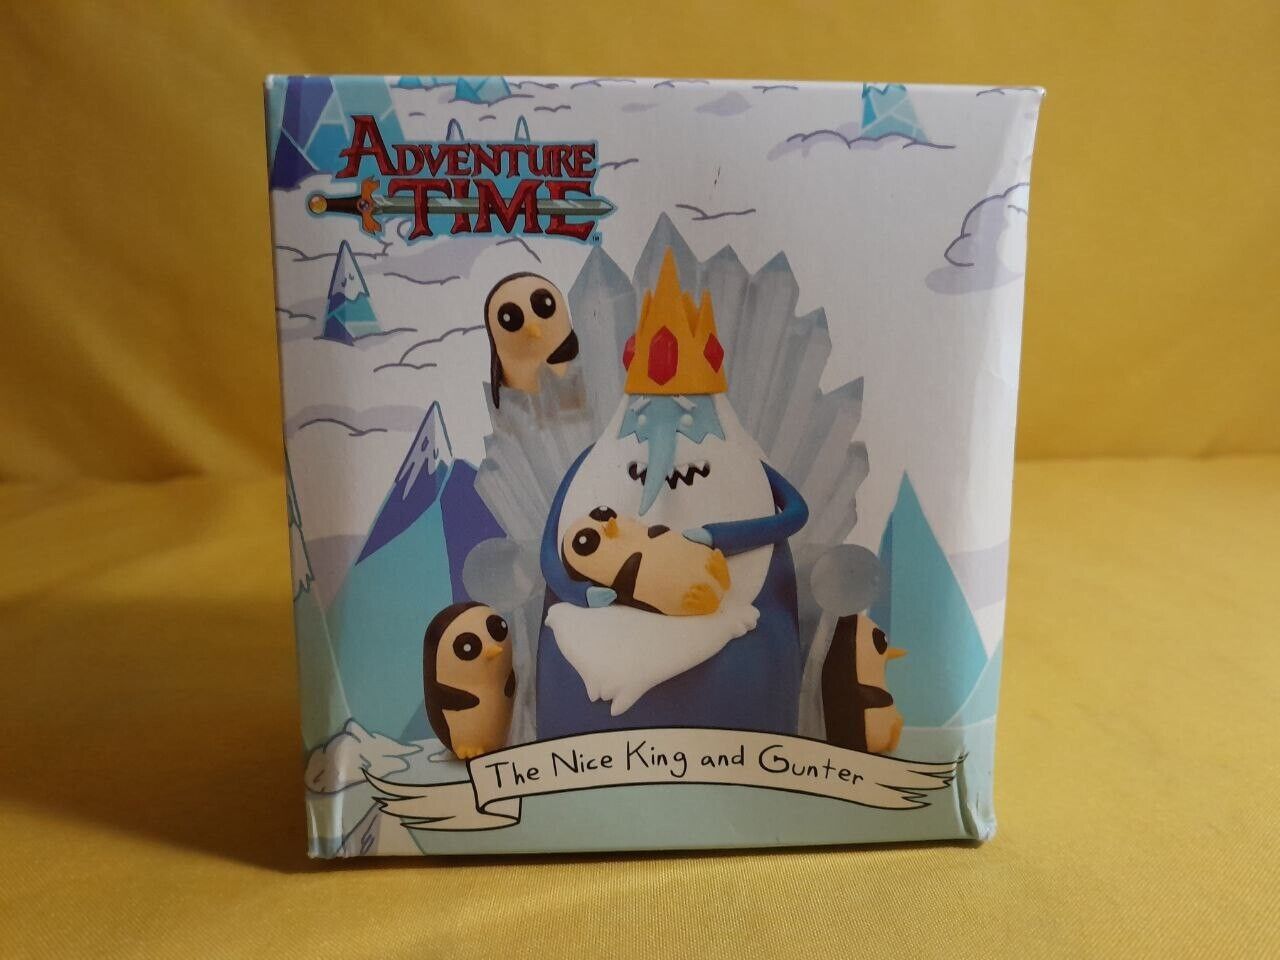 ADVENTURE TIME THE NICE KING AND GUNTHER EXCUSIVE LOOT CRATE ICE STATUE - M15